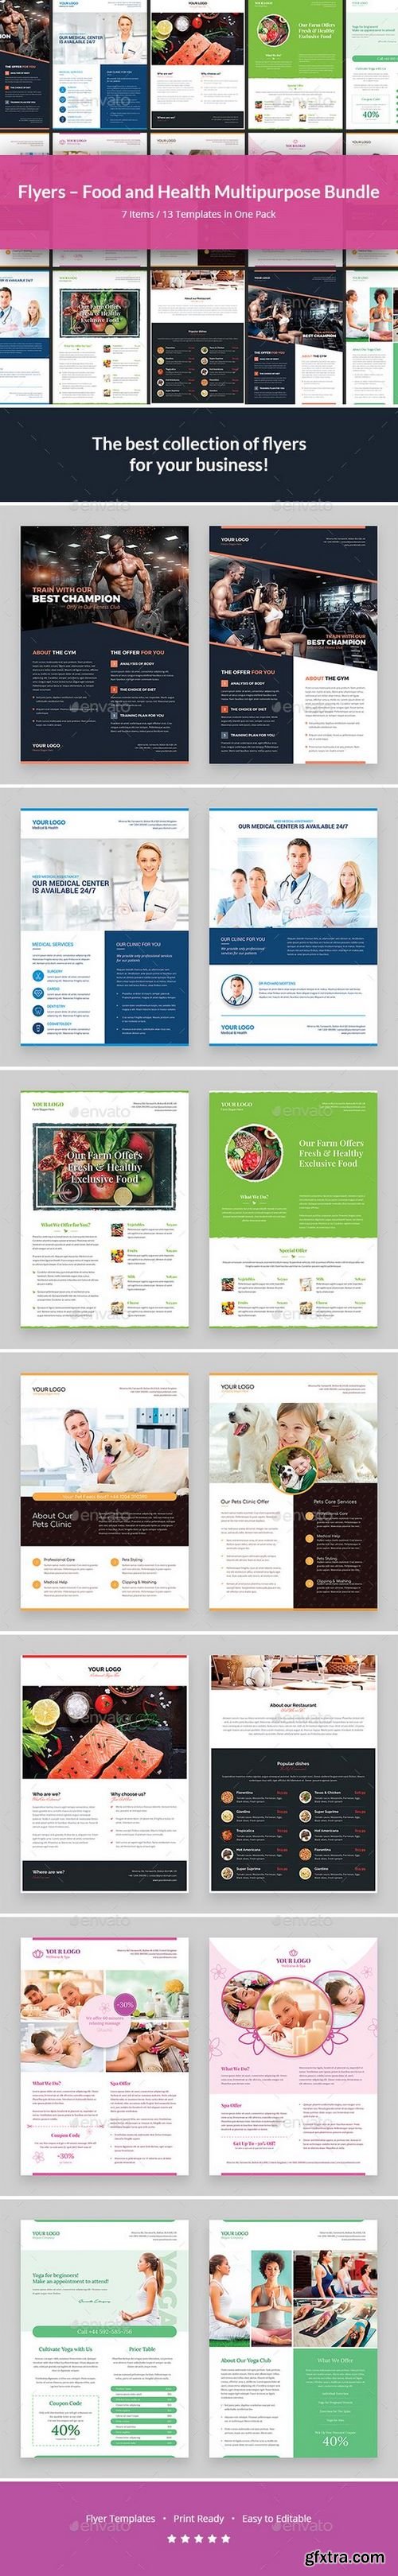 Graphicriver - Flyers – Food and Health Multipurpose Bundle 7 in 1 21263742